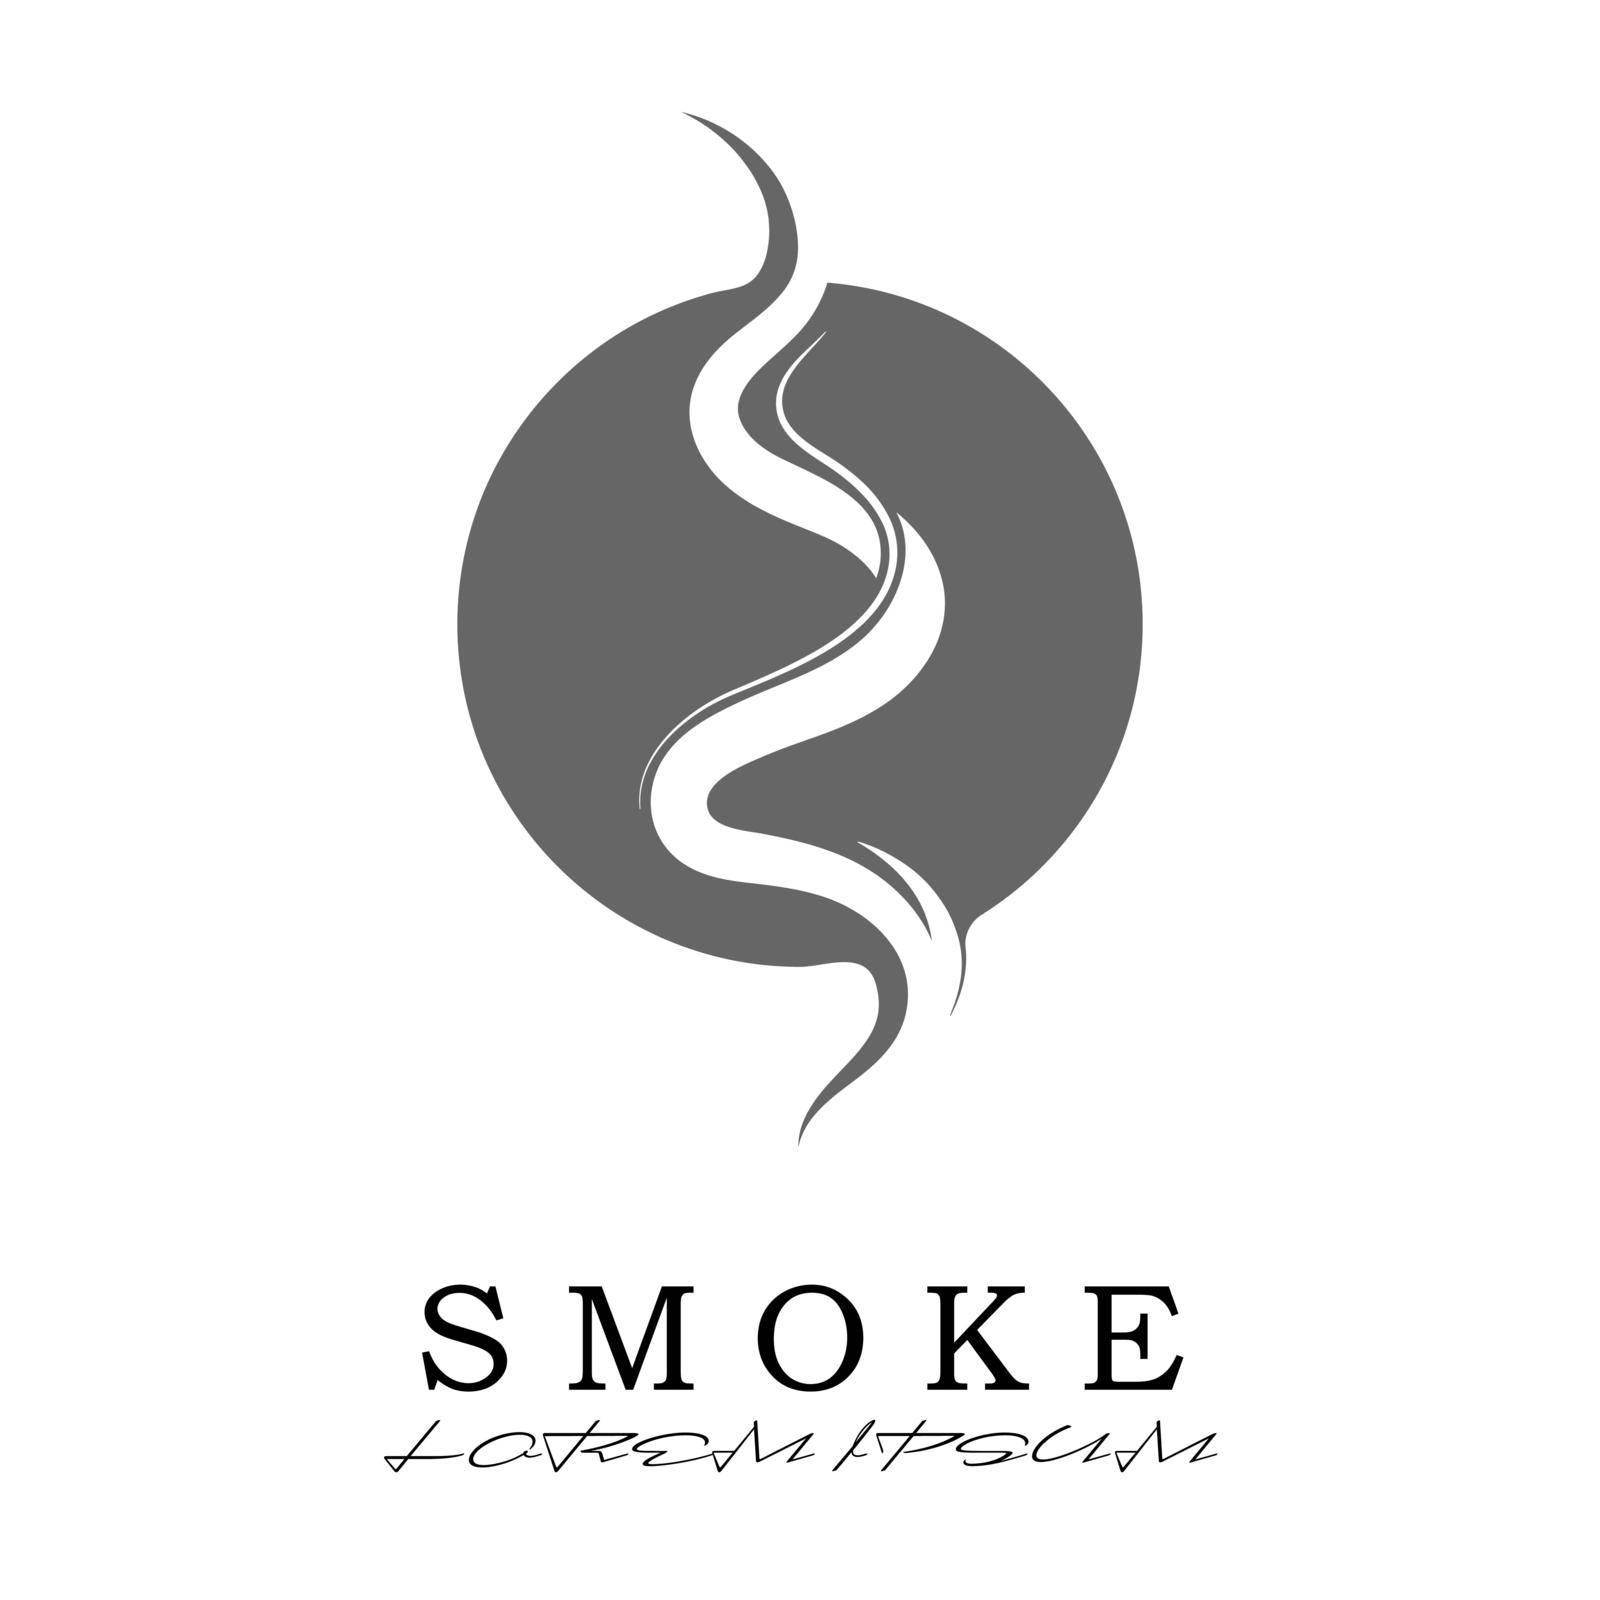 Vector icon of smoke, incense, or steam. Flat style by Grommik